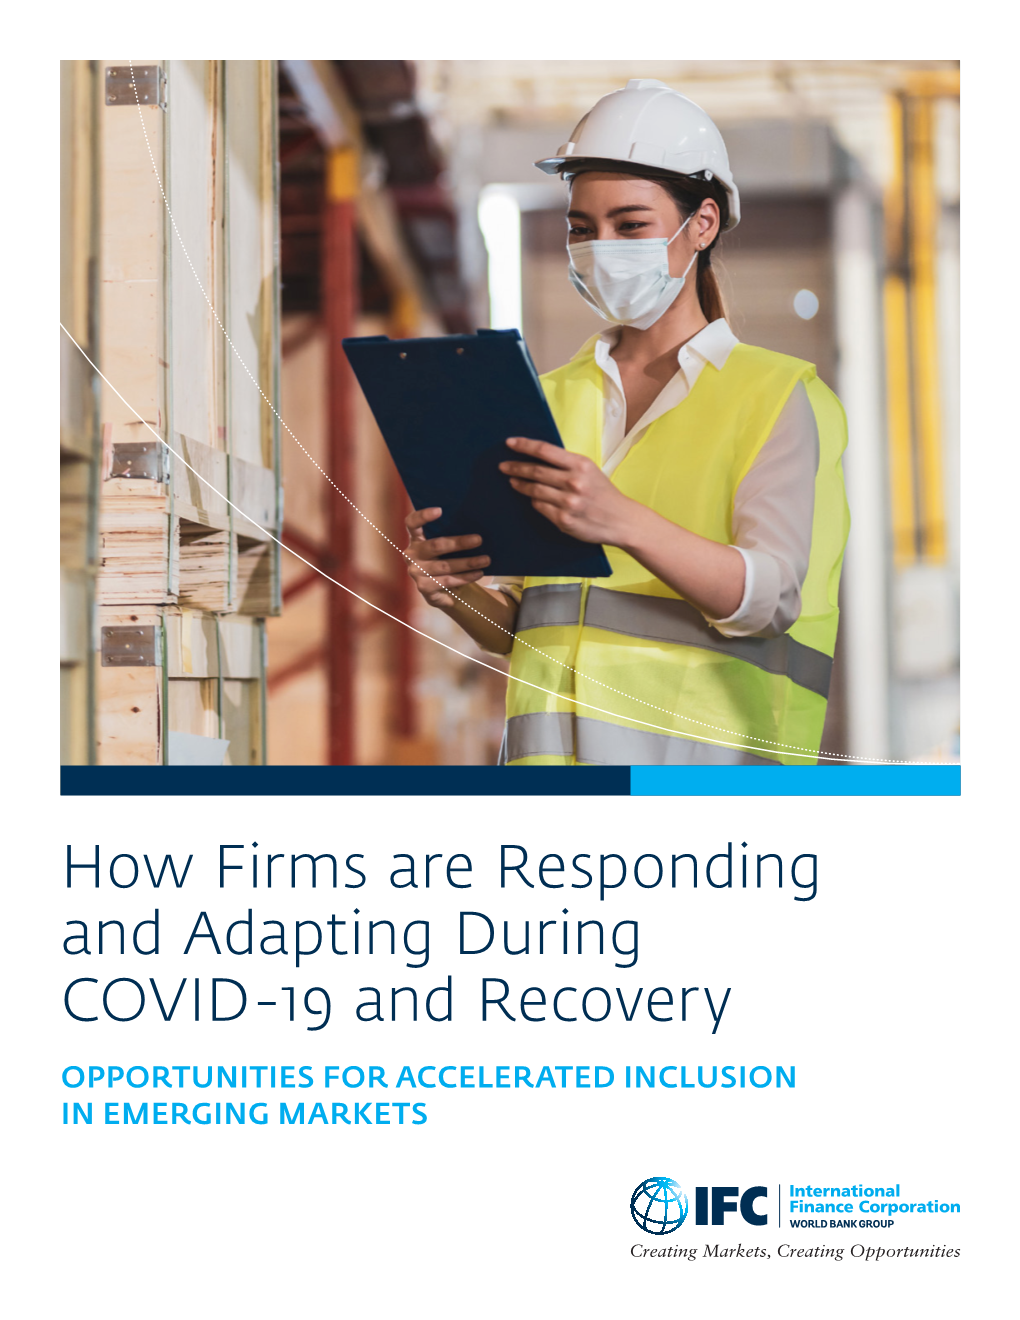 How Firms Are Responding and Adapting During COVID-19